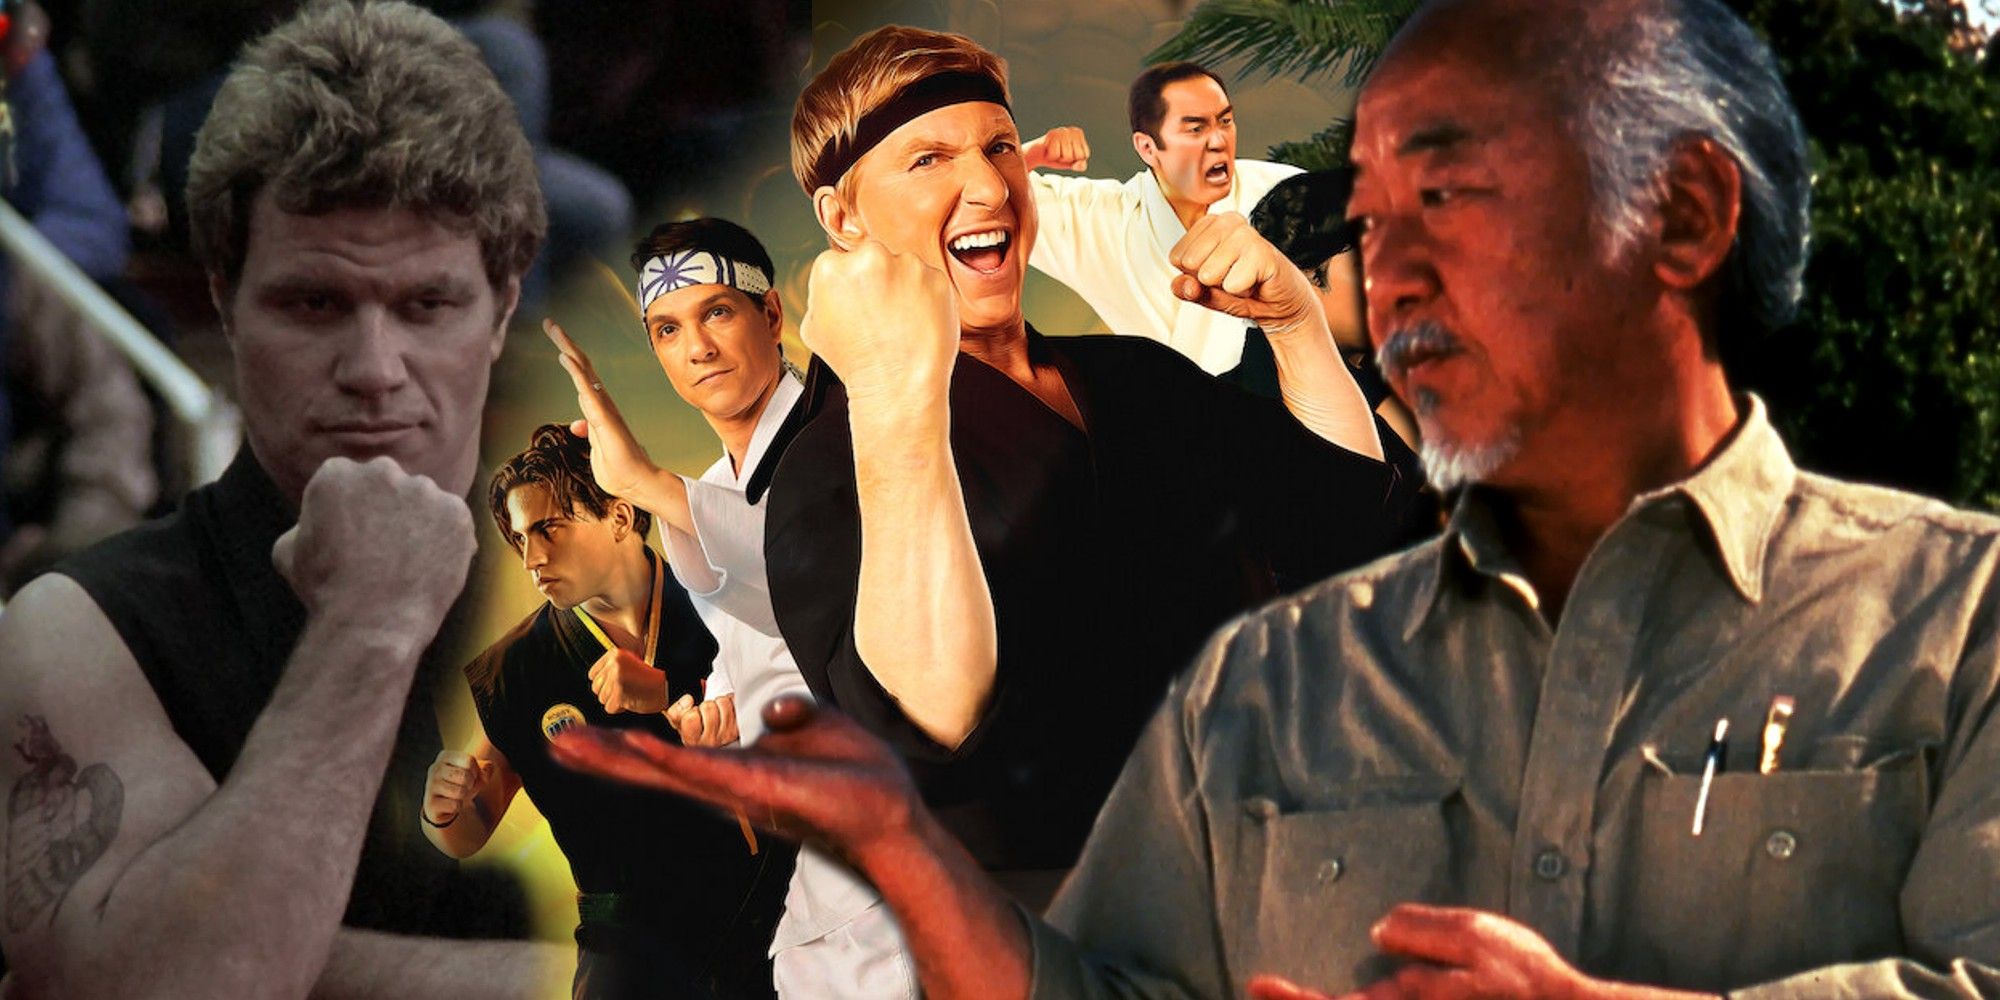 Oh No, The New Karate Movie Could Be Repeating The Mistake That Almost Killed The Franchise 29 Years Ago